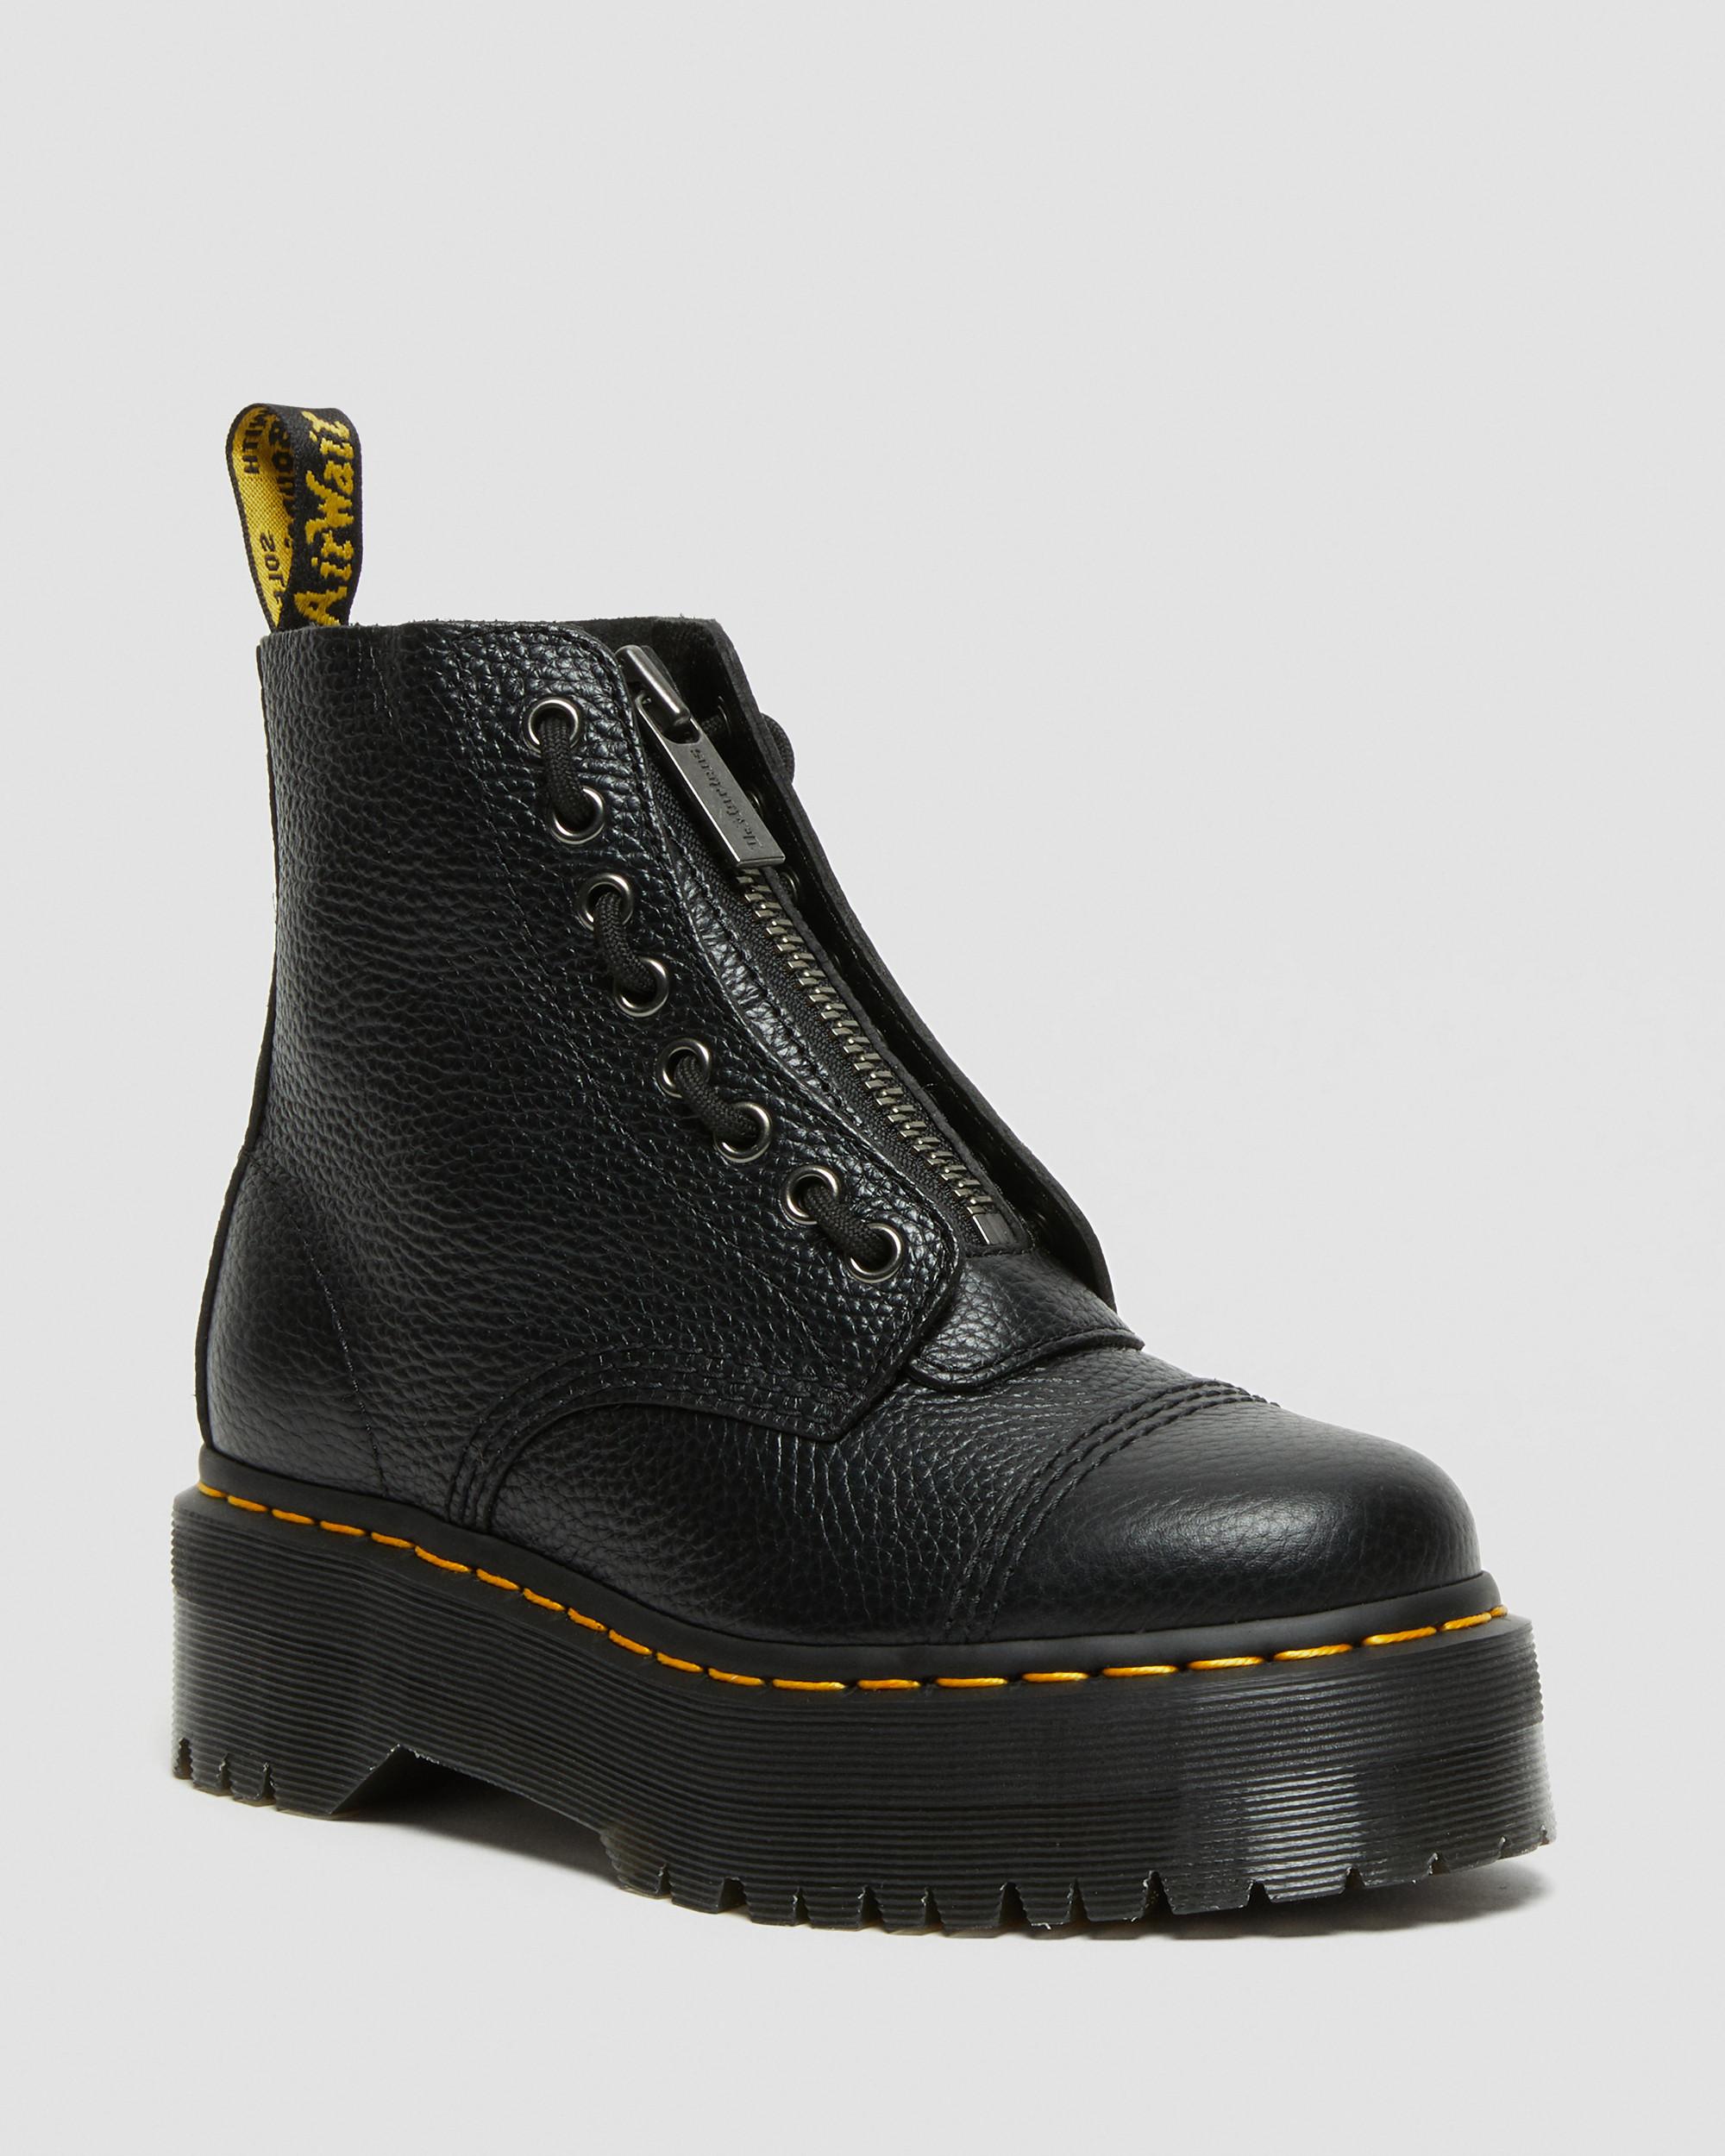 Sinclair Milled Nappa Leather Platform BootsSinclair Milled Nappa Leather Platform Boots Dr. Martens